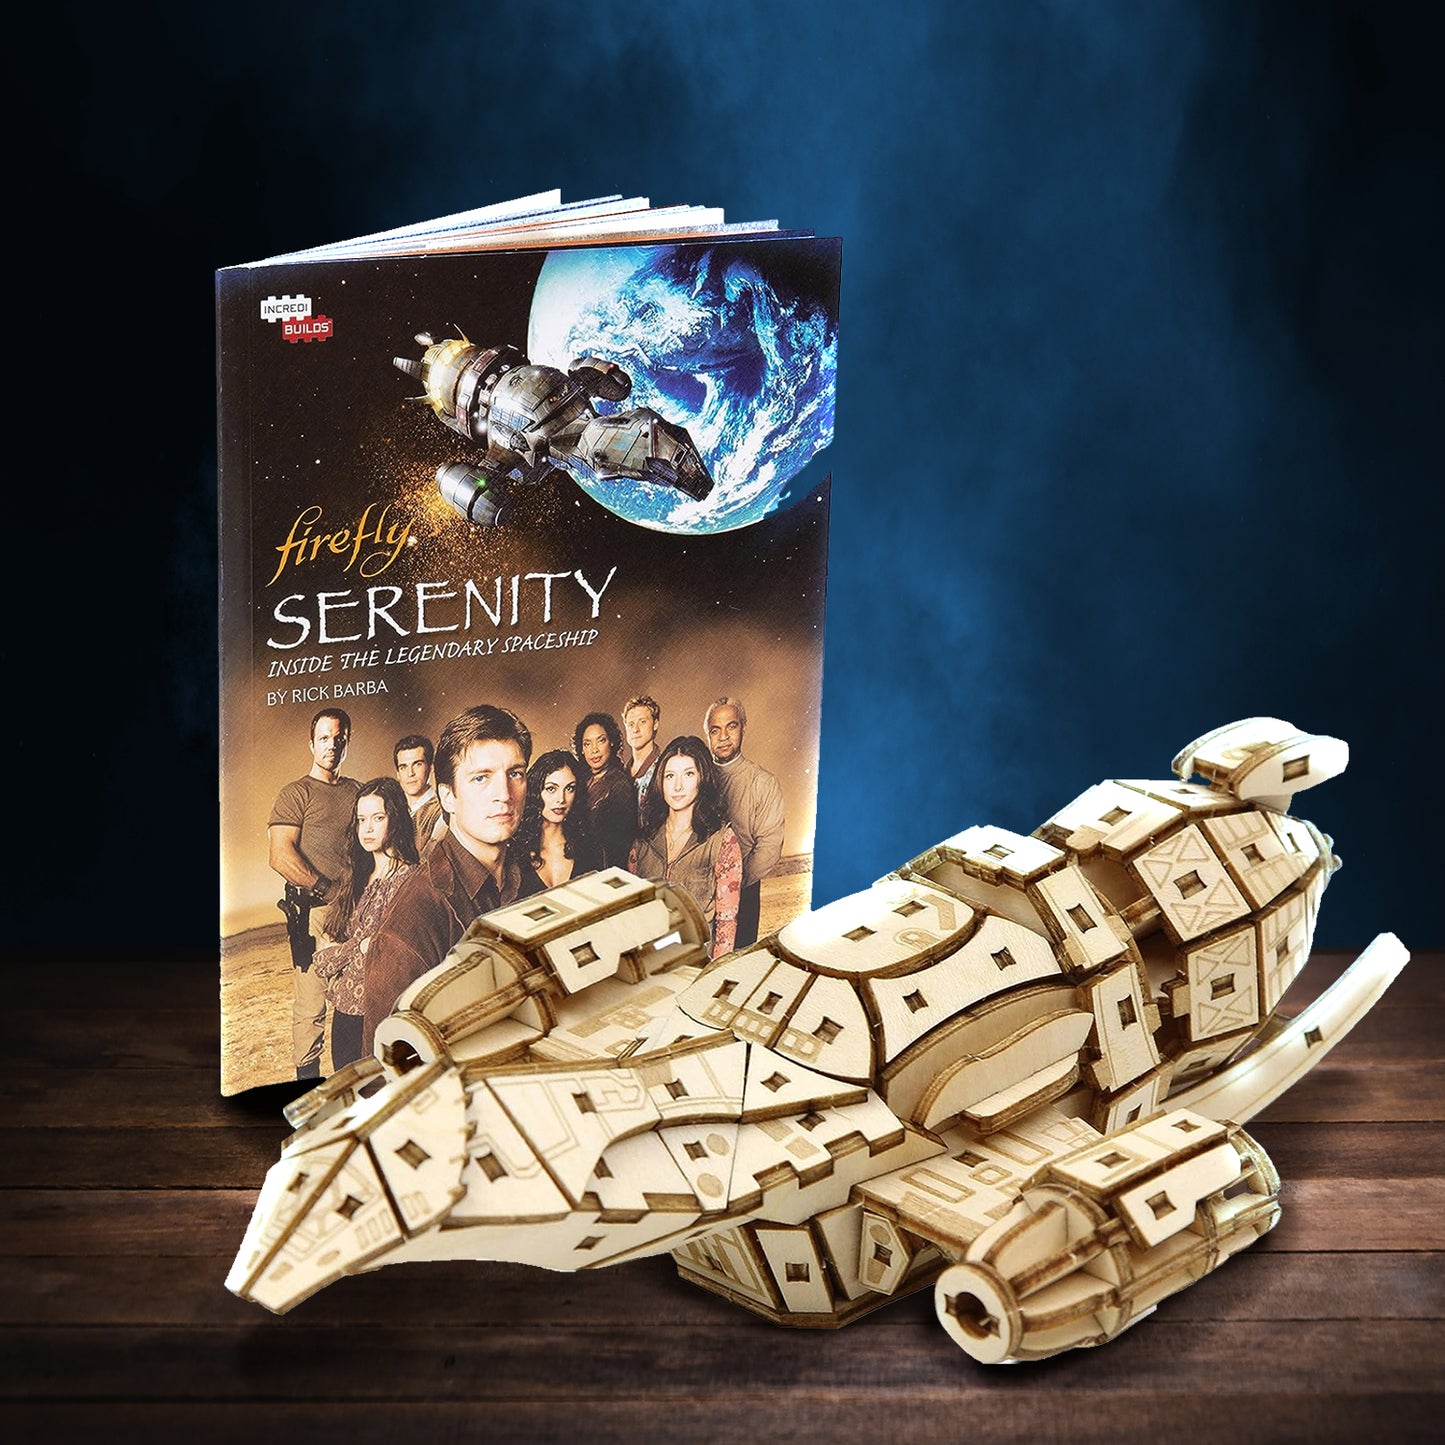 A wooden model of the spaceship Serenity, from the TV series "Firefly," on a wooden table against a smoky blue background. Next to the model is a booklet with building instructions, with the "Firefly" cast on the cover.